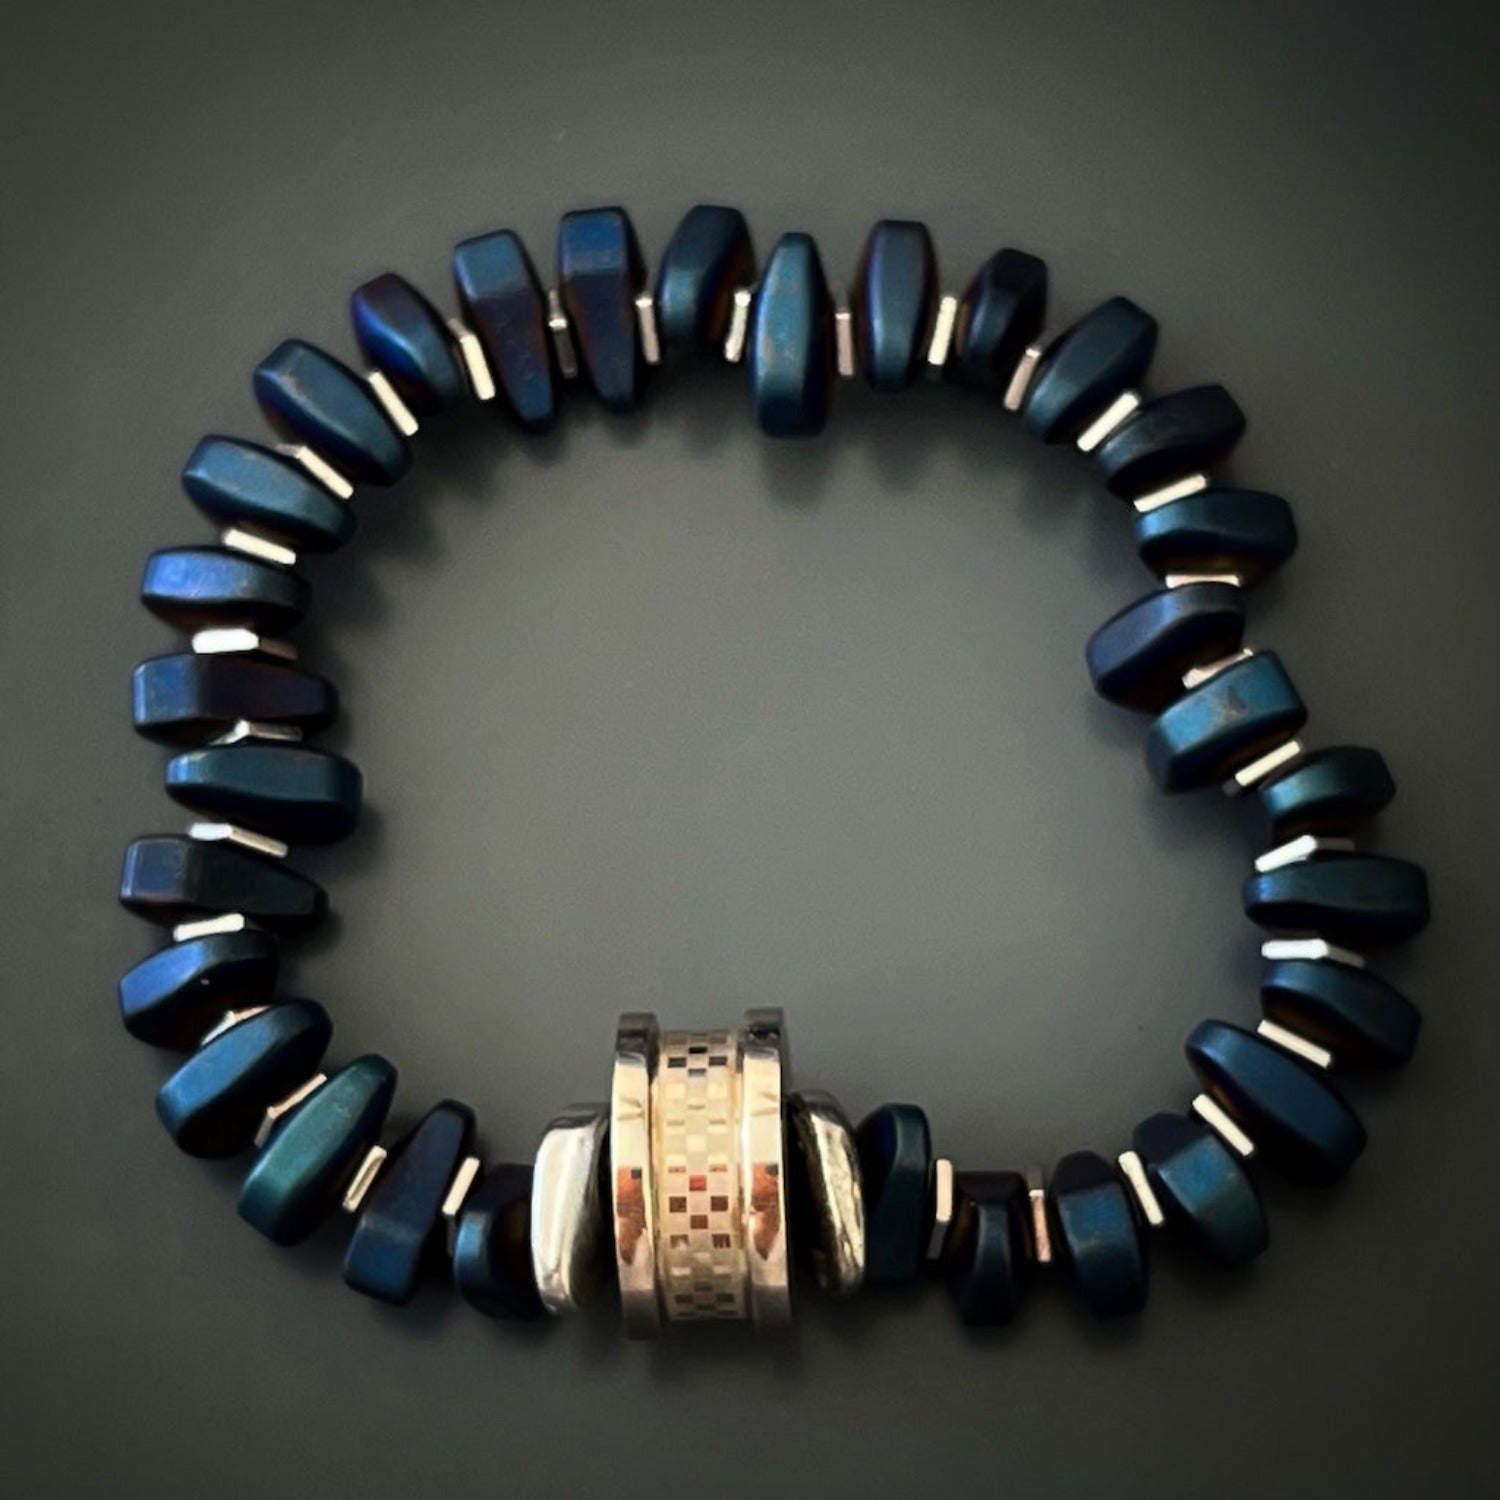 The calming blue hue of the hematite beads on the Blue Amour Men Bracelet